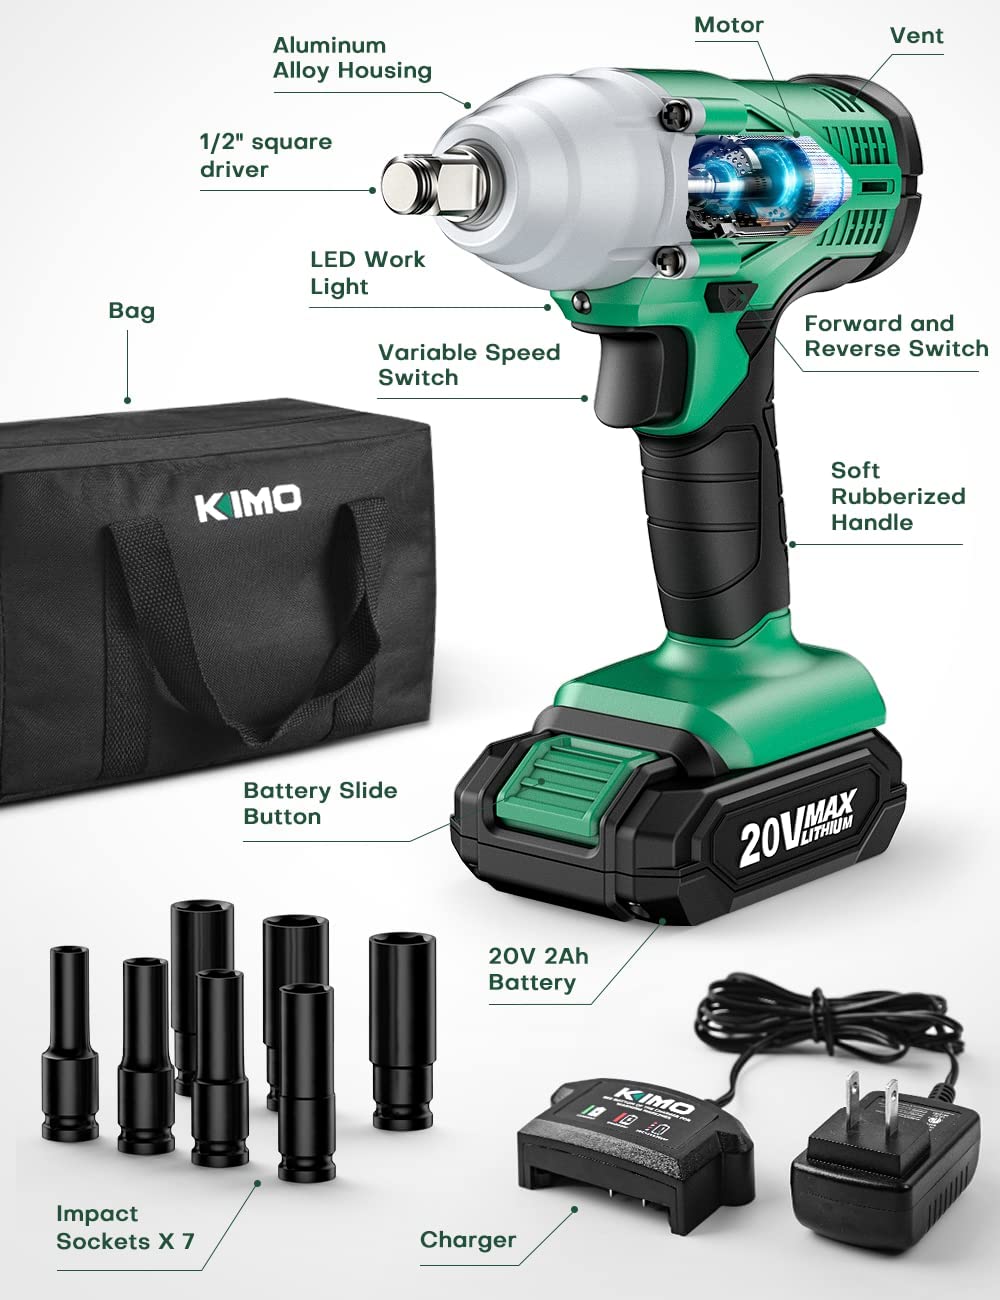 20V Cordless Impact Wrench1/2In,2000In-Lbs Torque3400 IPM,Charger＆2.0Ah Li-ion Battery,7Pcs Sockets